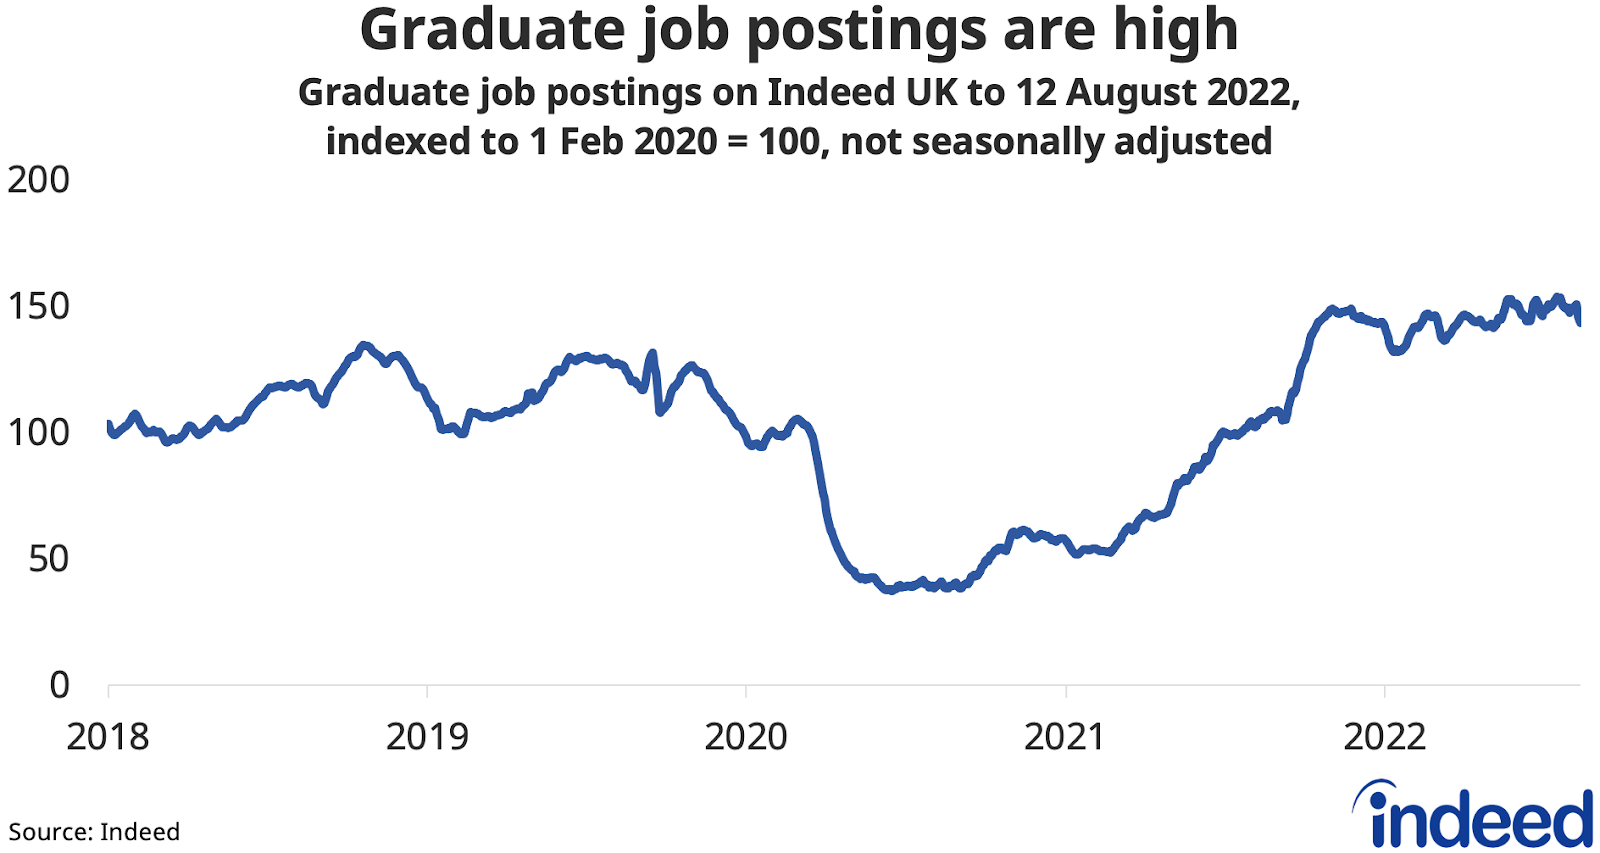 A line chart titled “Graduate job postings are high” showing the trend in UK graduate jobs, indexed to the 1 February 2020 level.